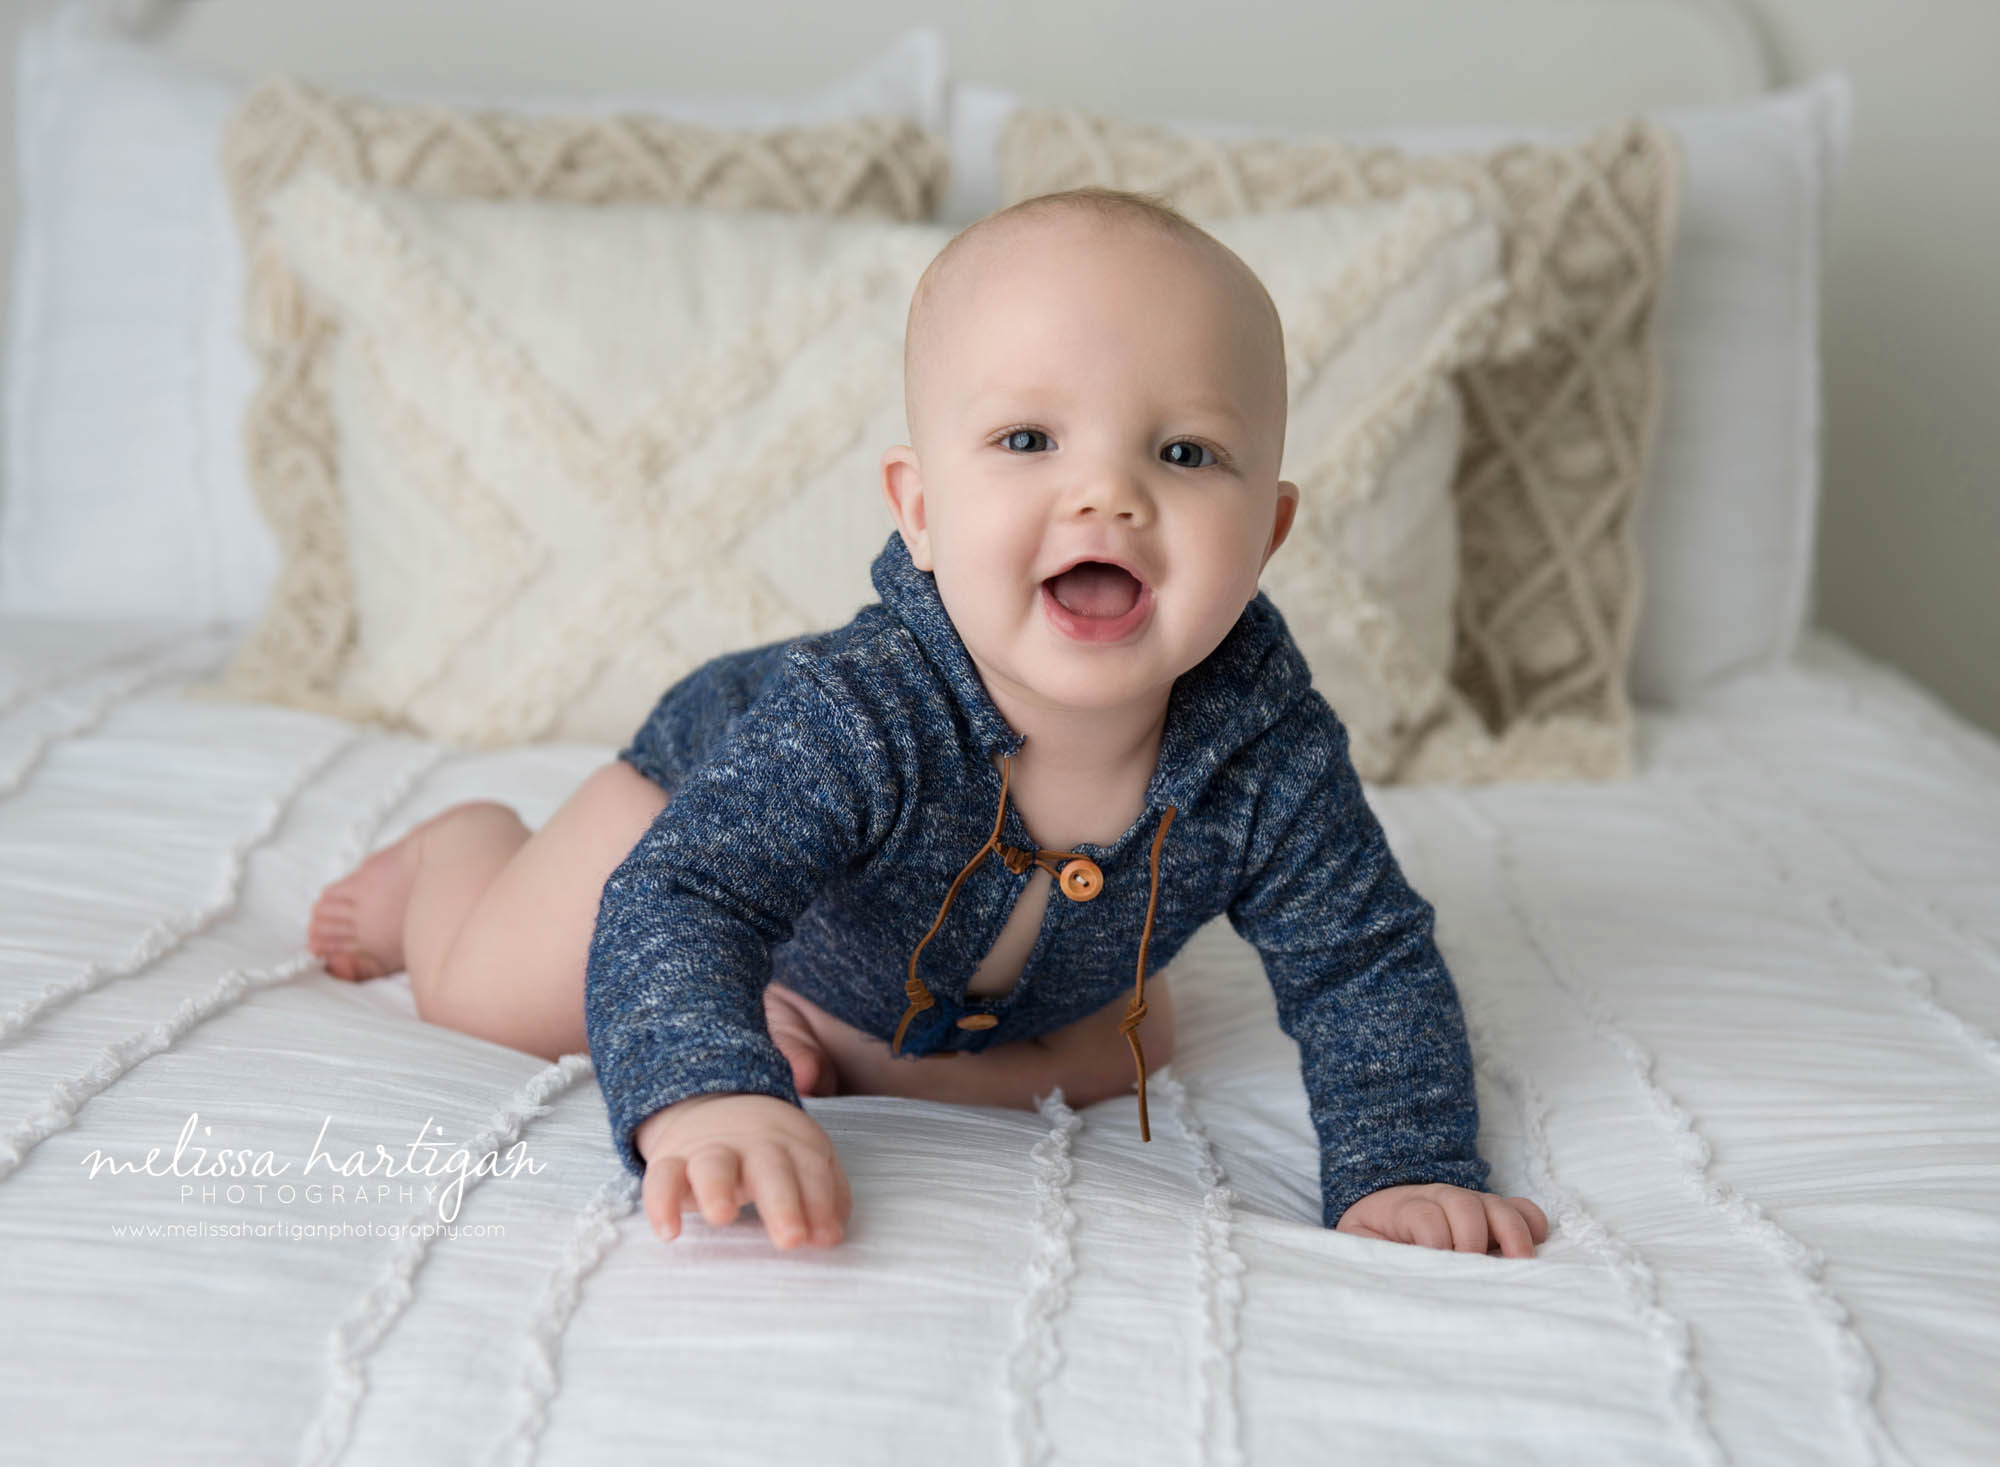 baby boy crawling on bed wearing blue outfit windsor ct baby photography